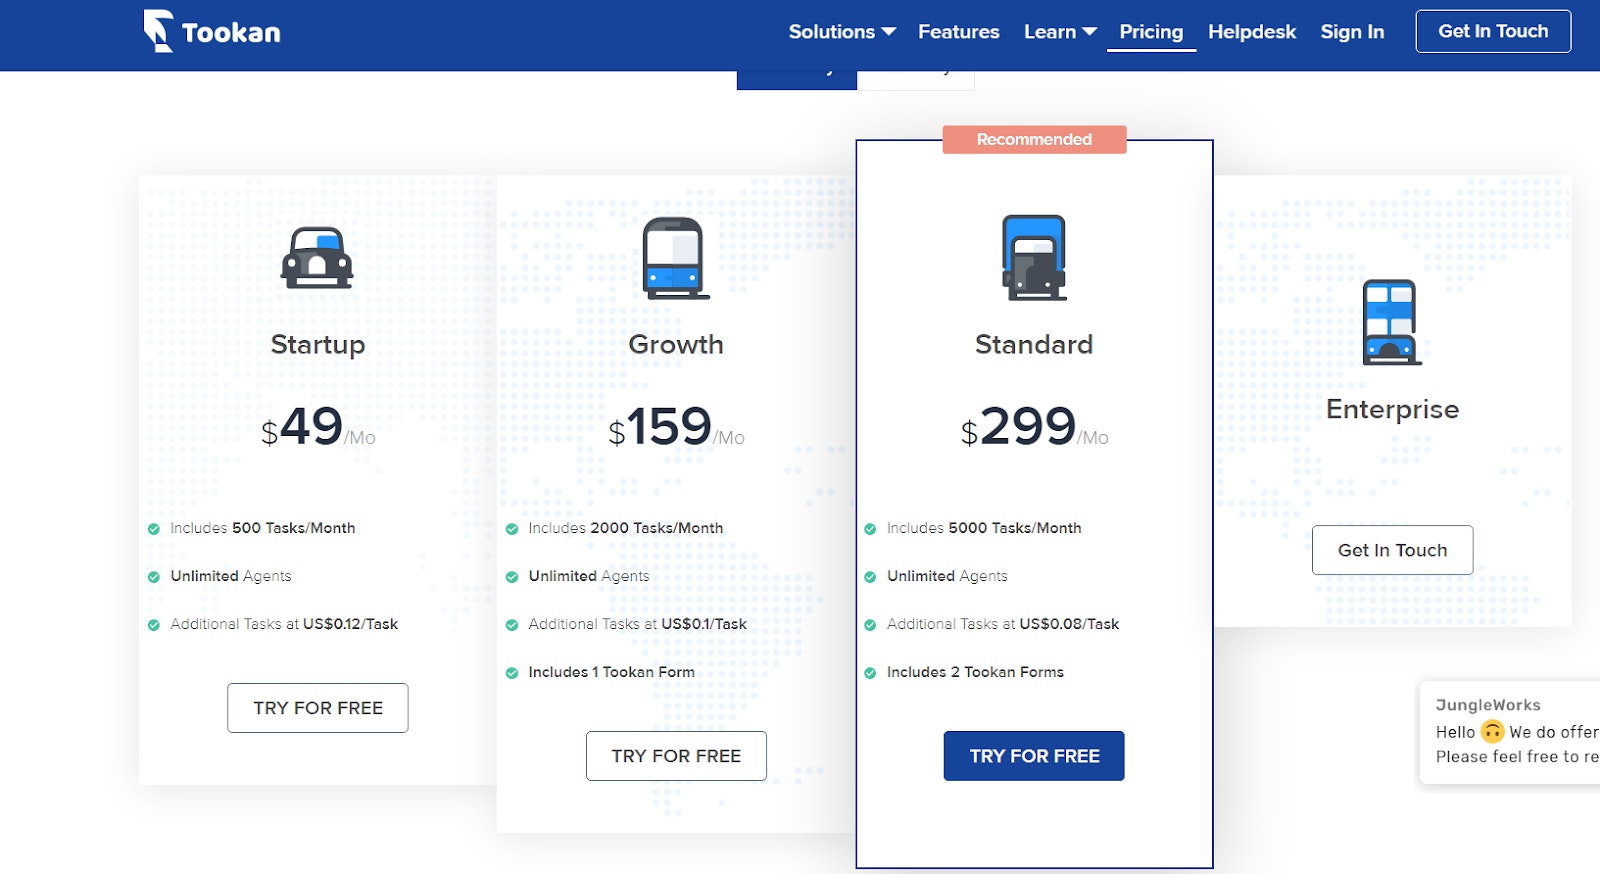 Image shows Tookan's pricing page, highlighting the standard package at &#36;299 per month. 